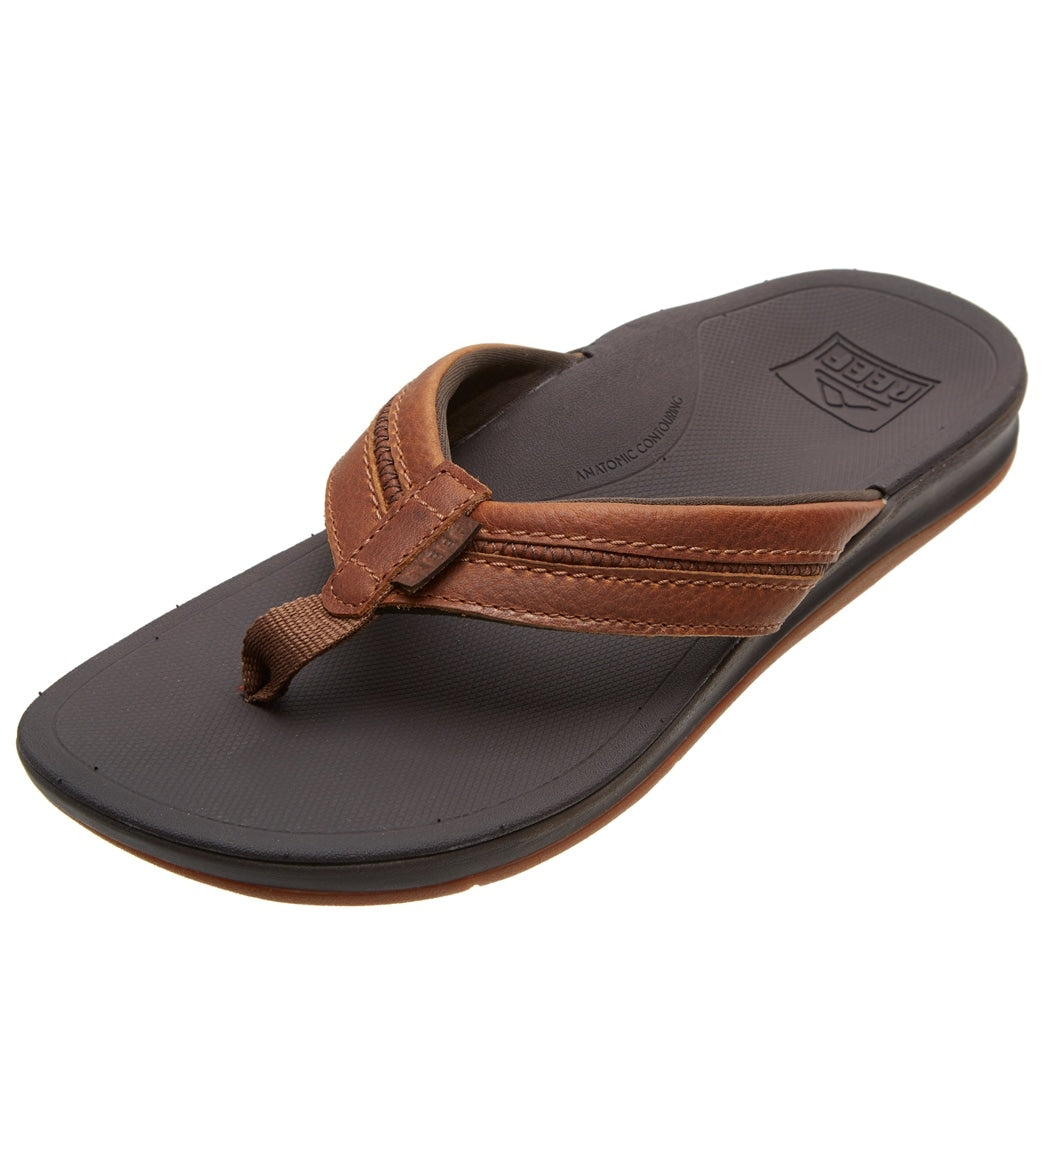 Reef Leather Ortho-Bounce Coast Flip Flop at SwimOutlet.com